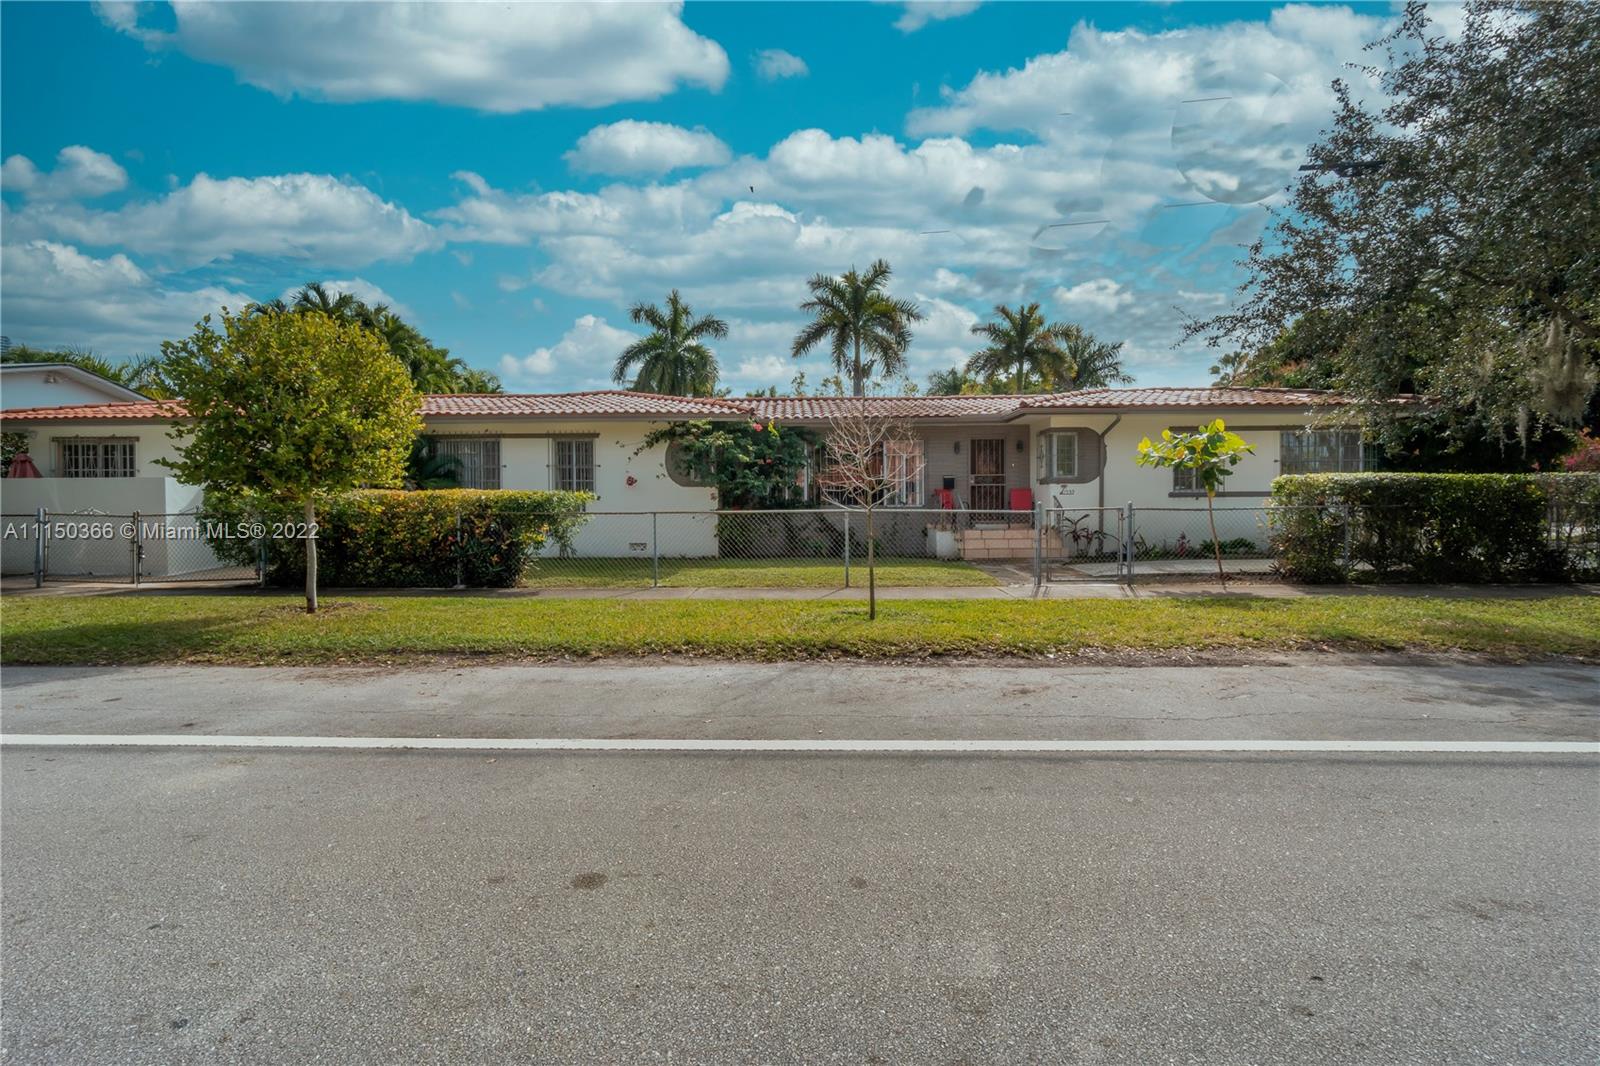 This house is located in one of the bests neighborhoods in Miami, THE ROADS.  Centrally located close to Brickell, Coral Gables and easy access to I95.  This house is in a CORNER LOT and has an amazing amount of potential. The property currently has an In-laws Quarters with potential income. This neighborhood is appealing due to its amazing surroundings and location. Hurry this house won't last. This can be your forever HOME.